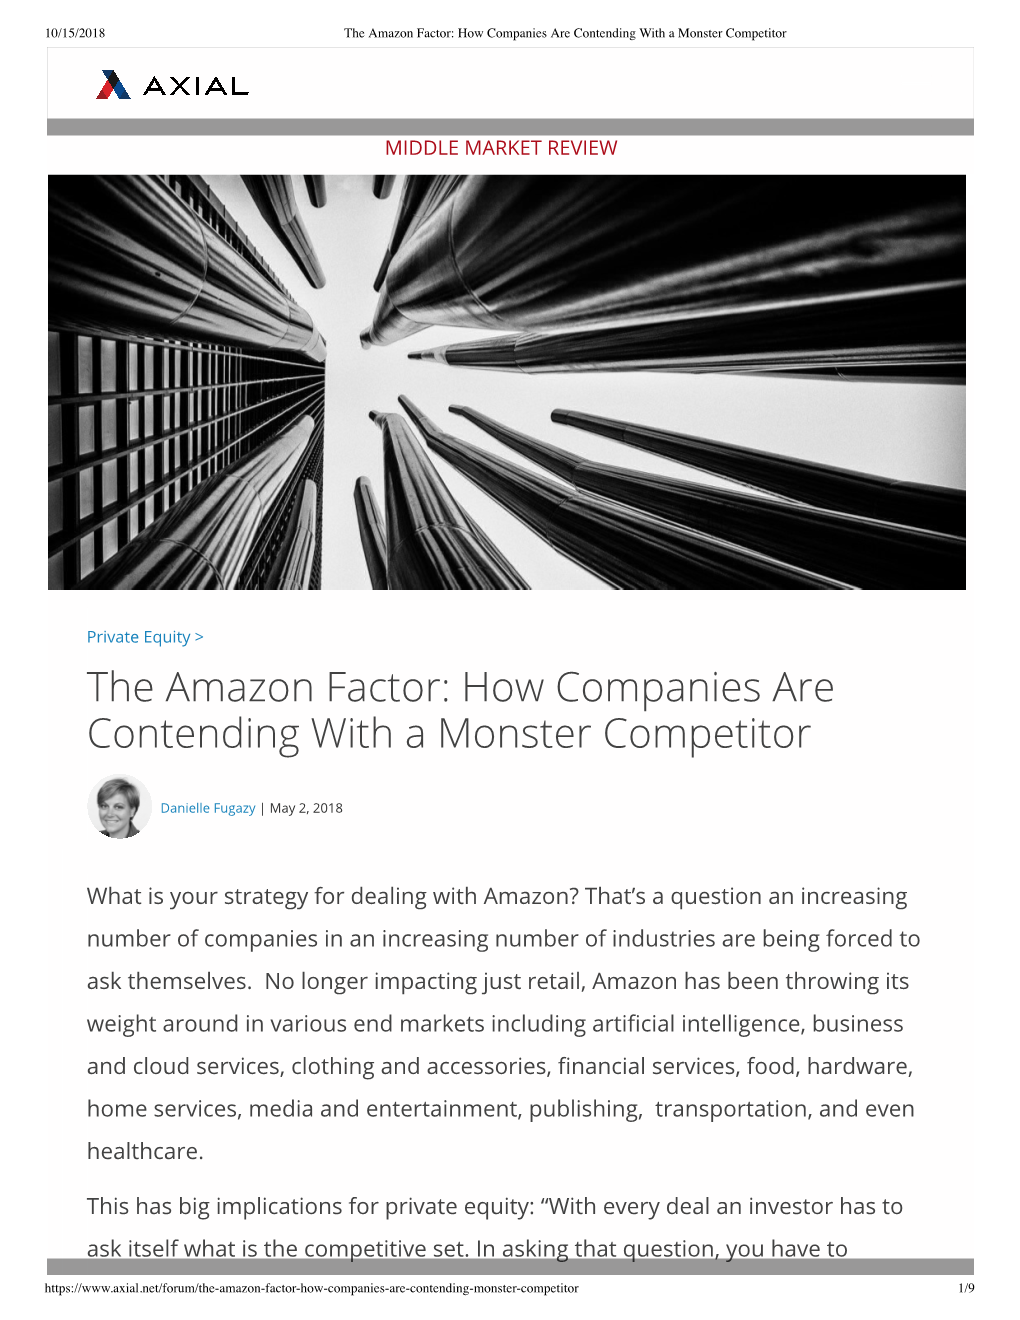 The Amazon Factor: How Companies Are Contending with a Monster Competitor